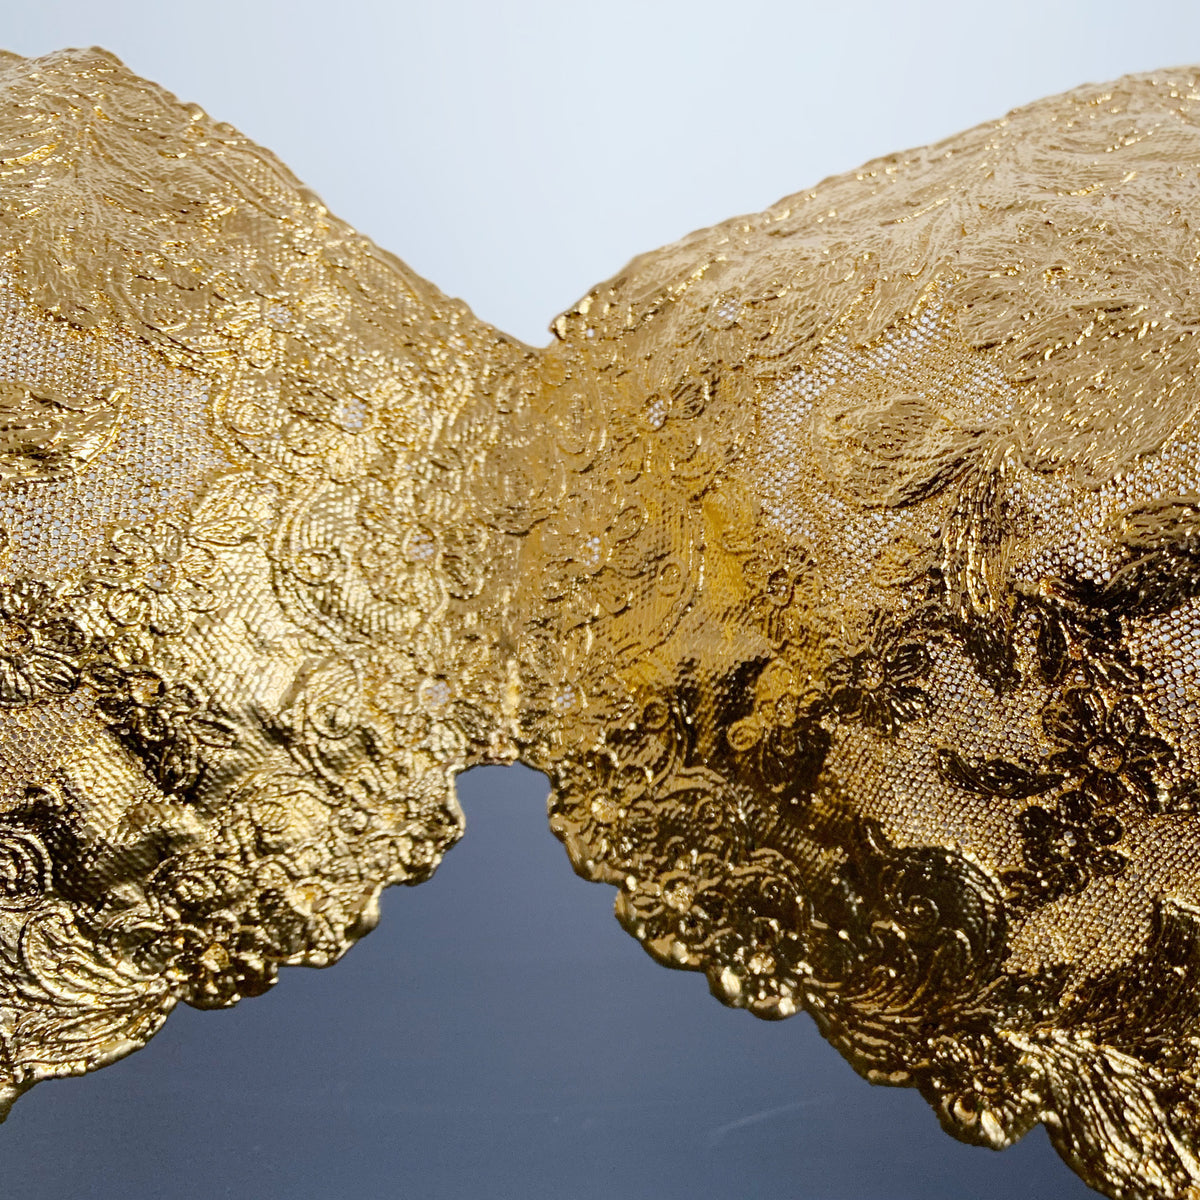 Gilded Lace Sculptures - Monika Knutsson